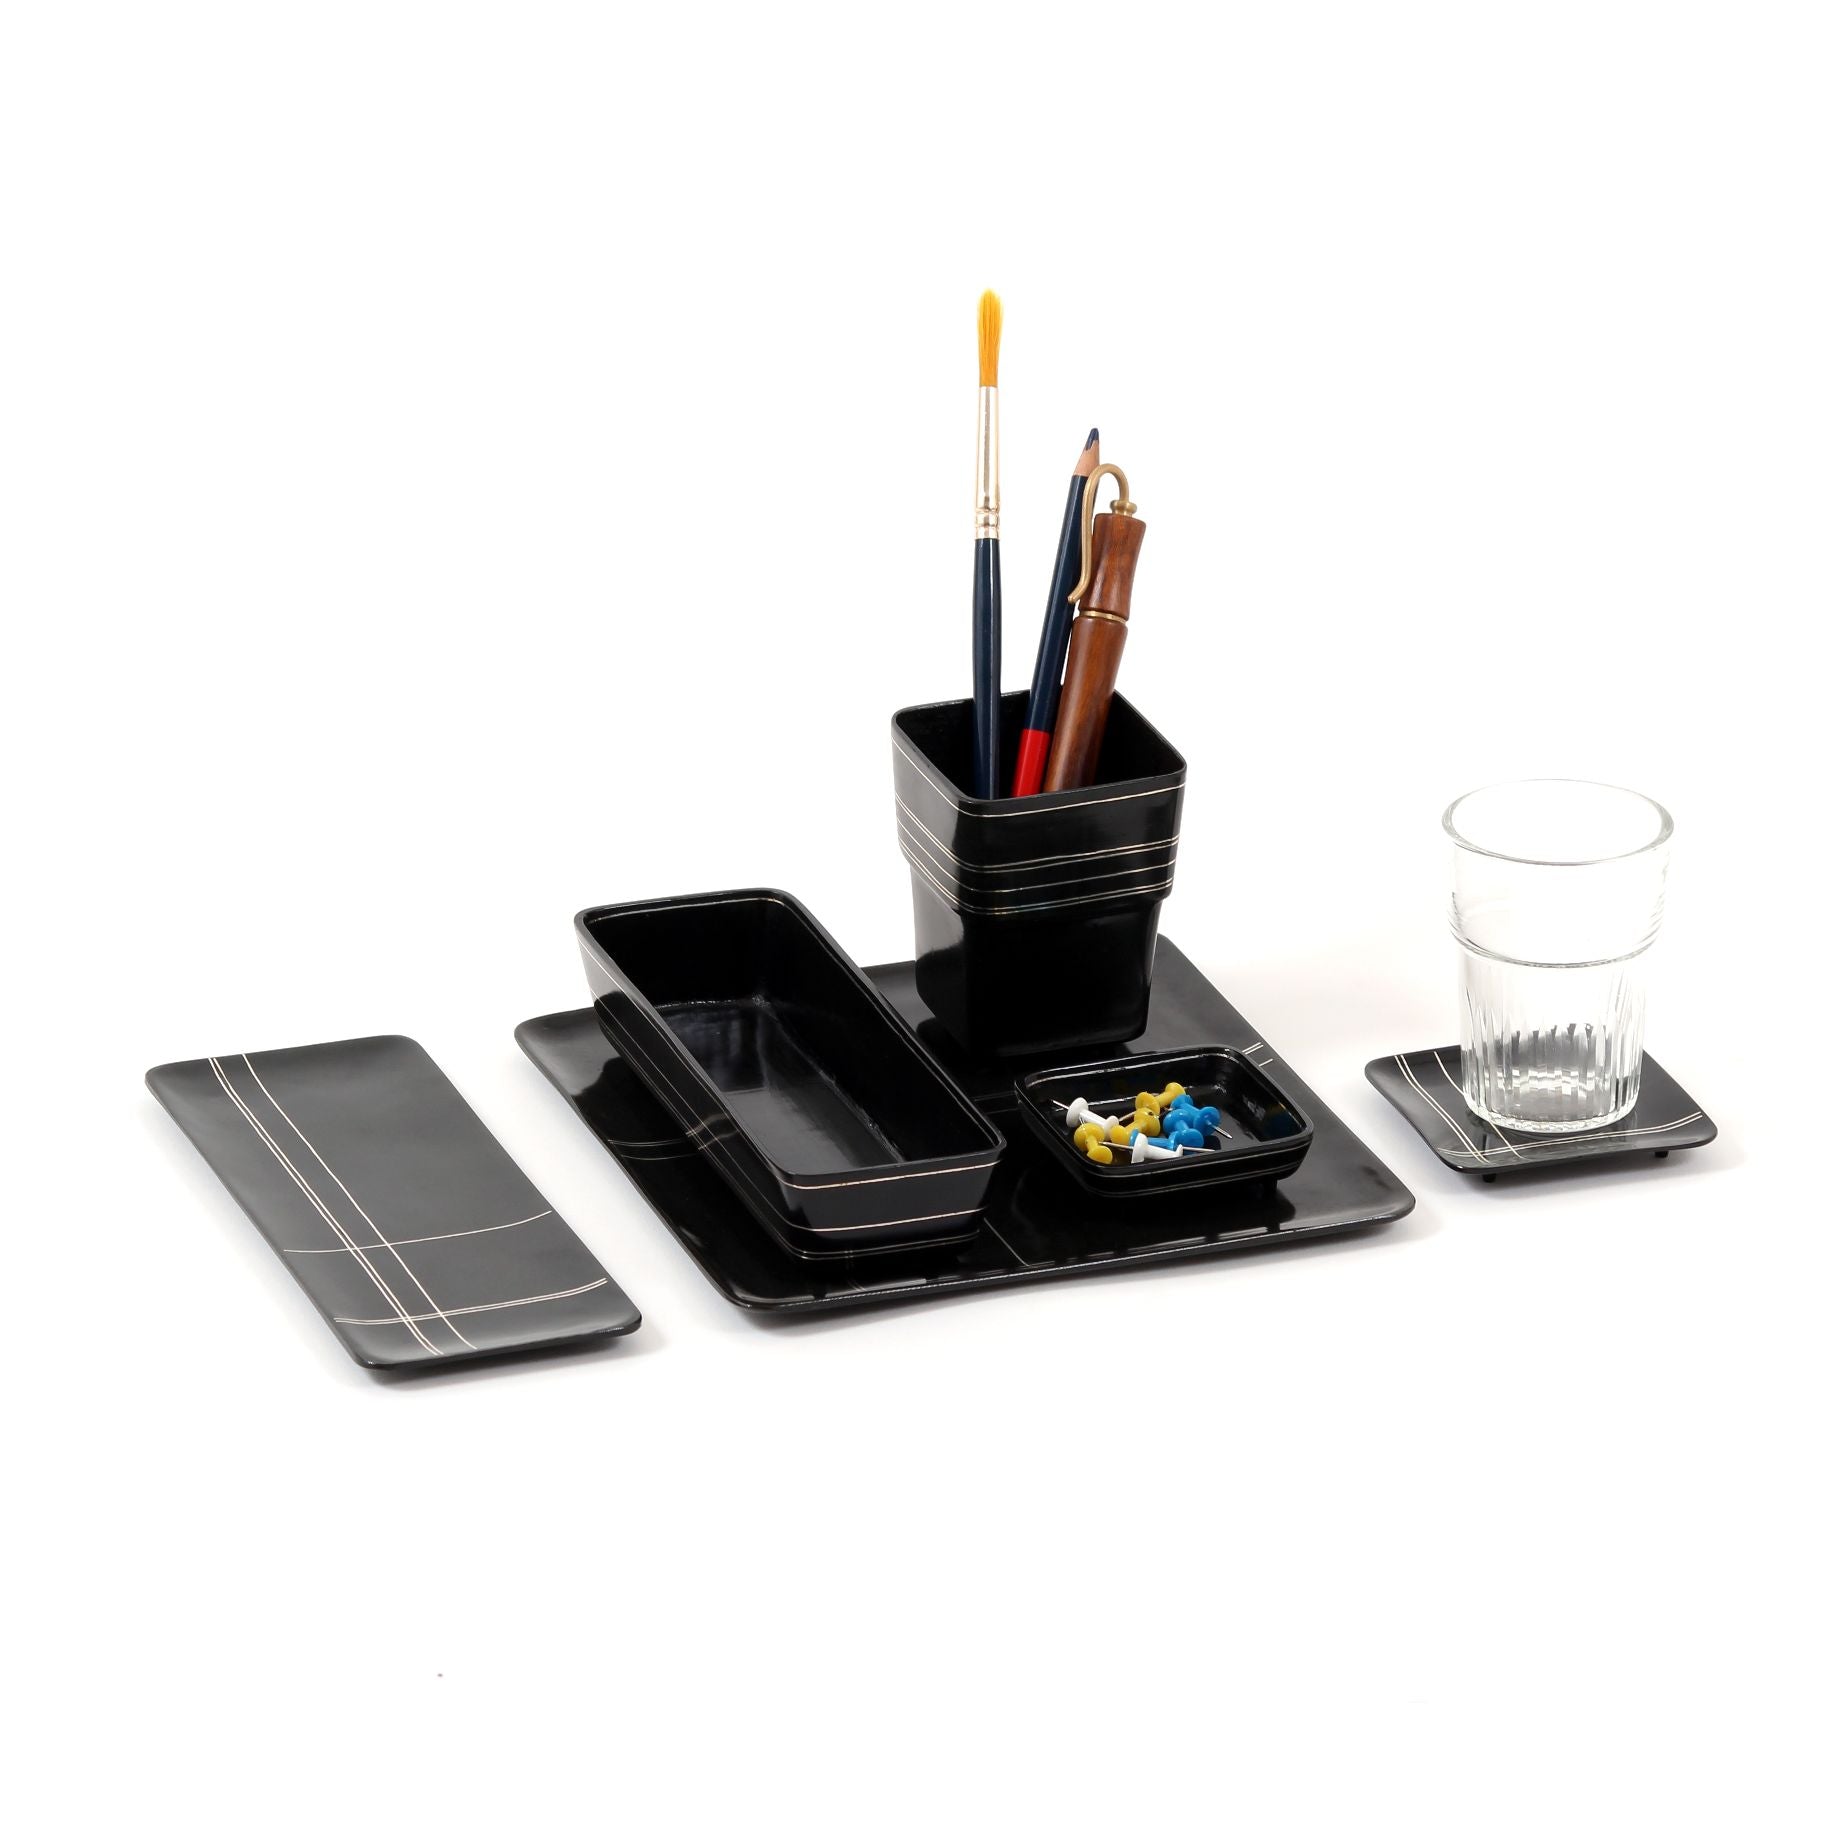 Tangram Bidri Lakeer Square tray play at work handcrafted in bidri minimalist art like functionality zinc copper Home object serving table top stationery desktop organizer